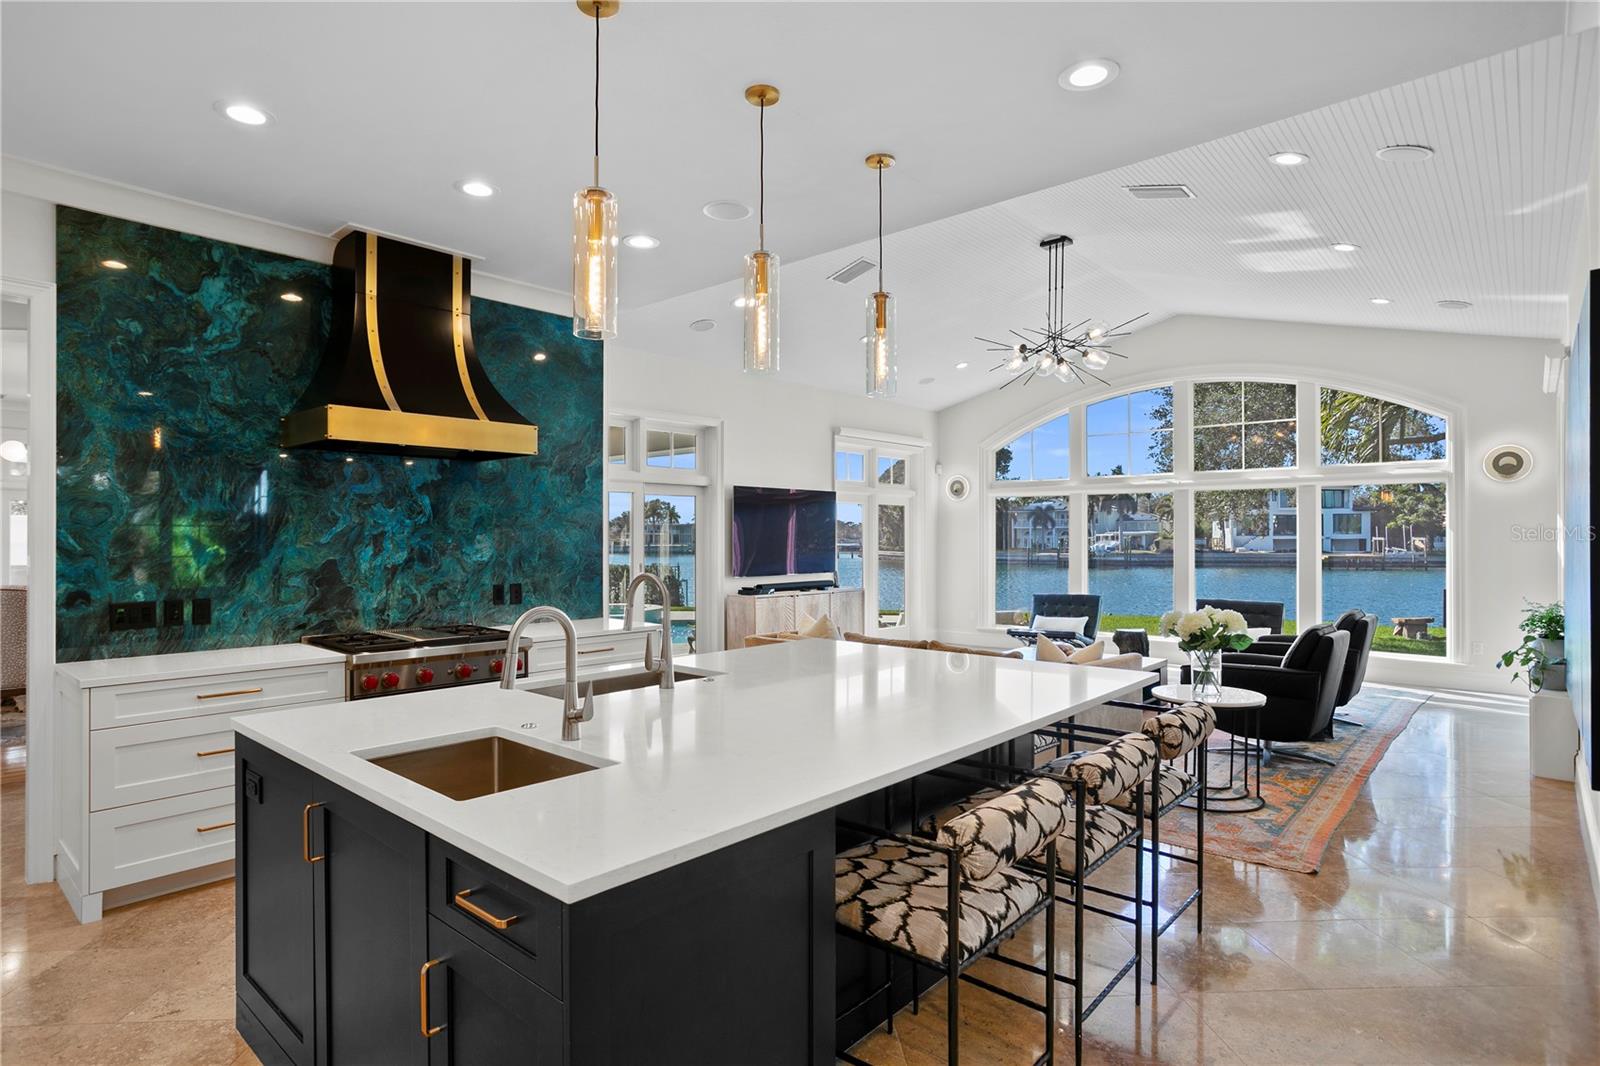 The gorgeous kitchen has everything you need with a water view!